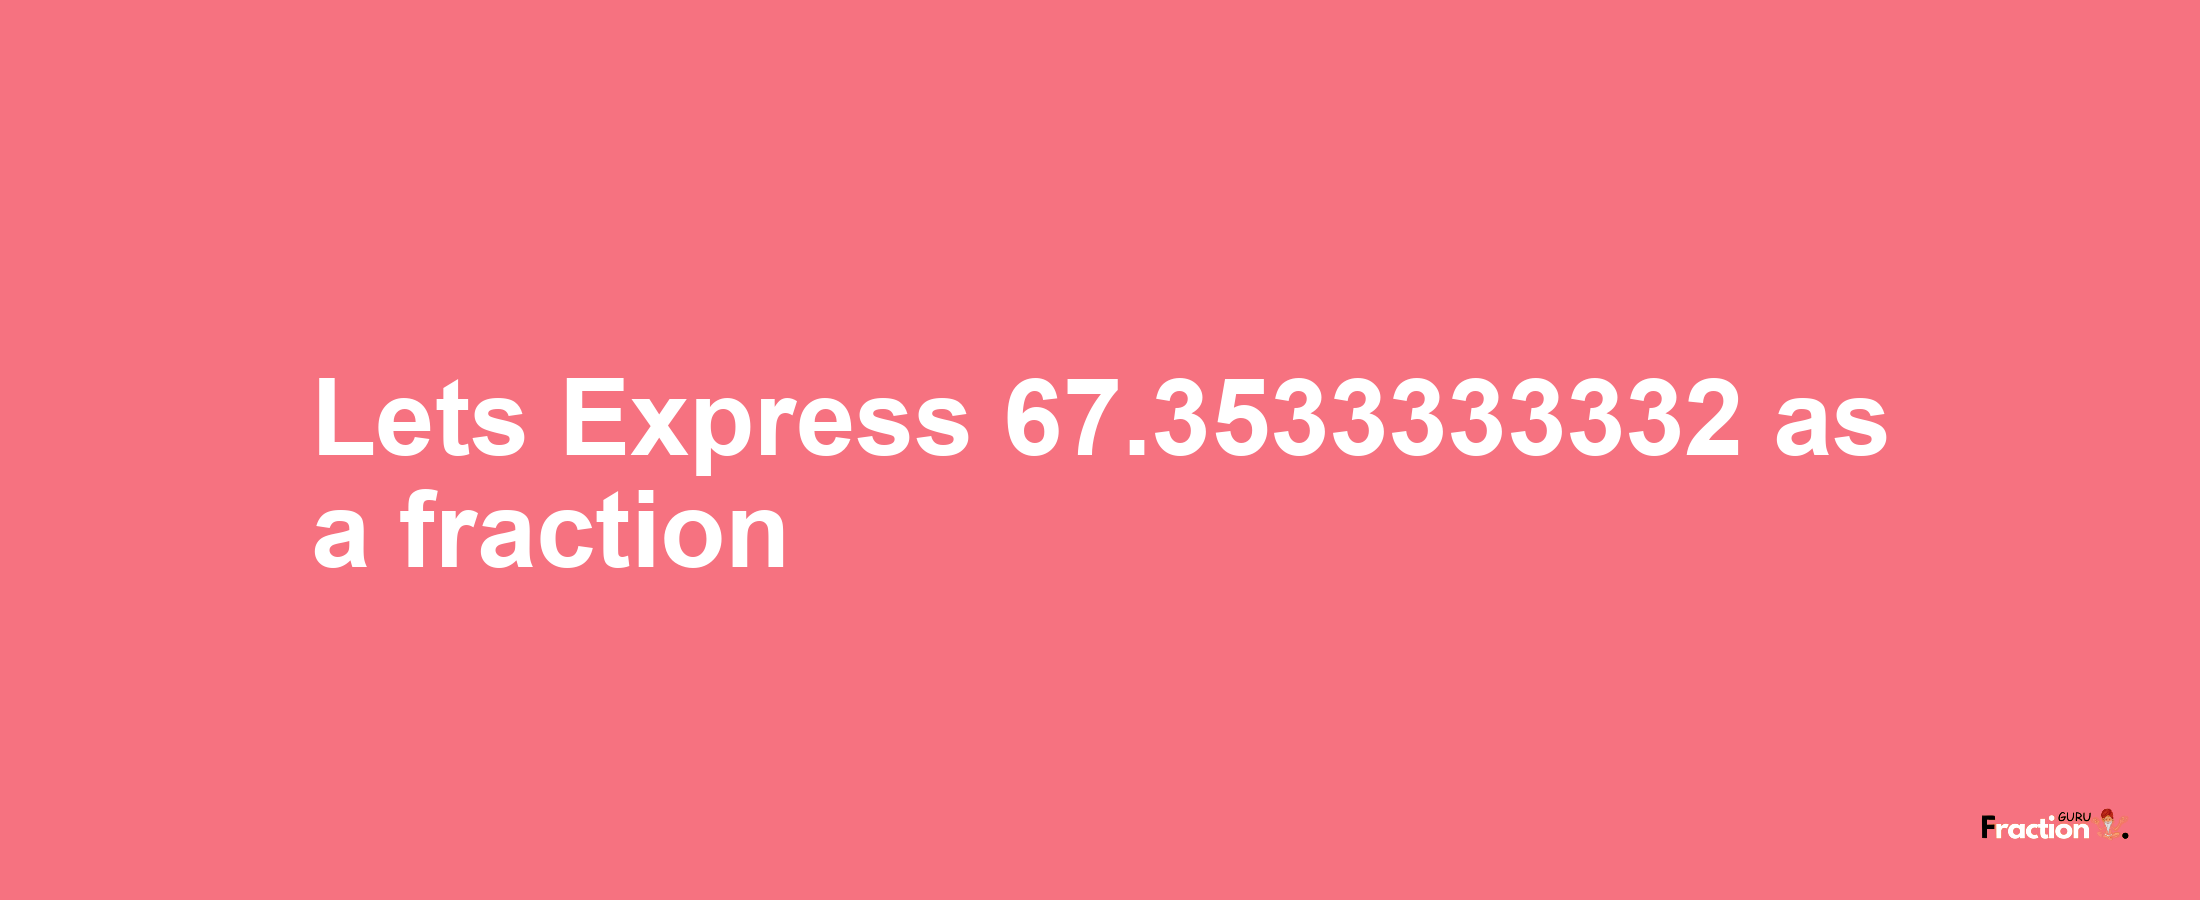 Lets Express 67.3533333332 as afraction